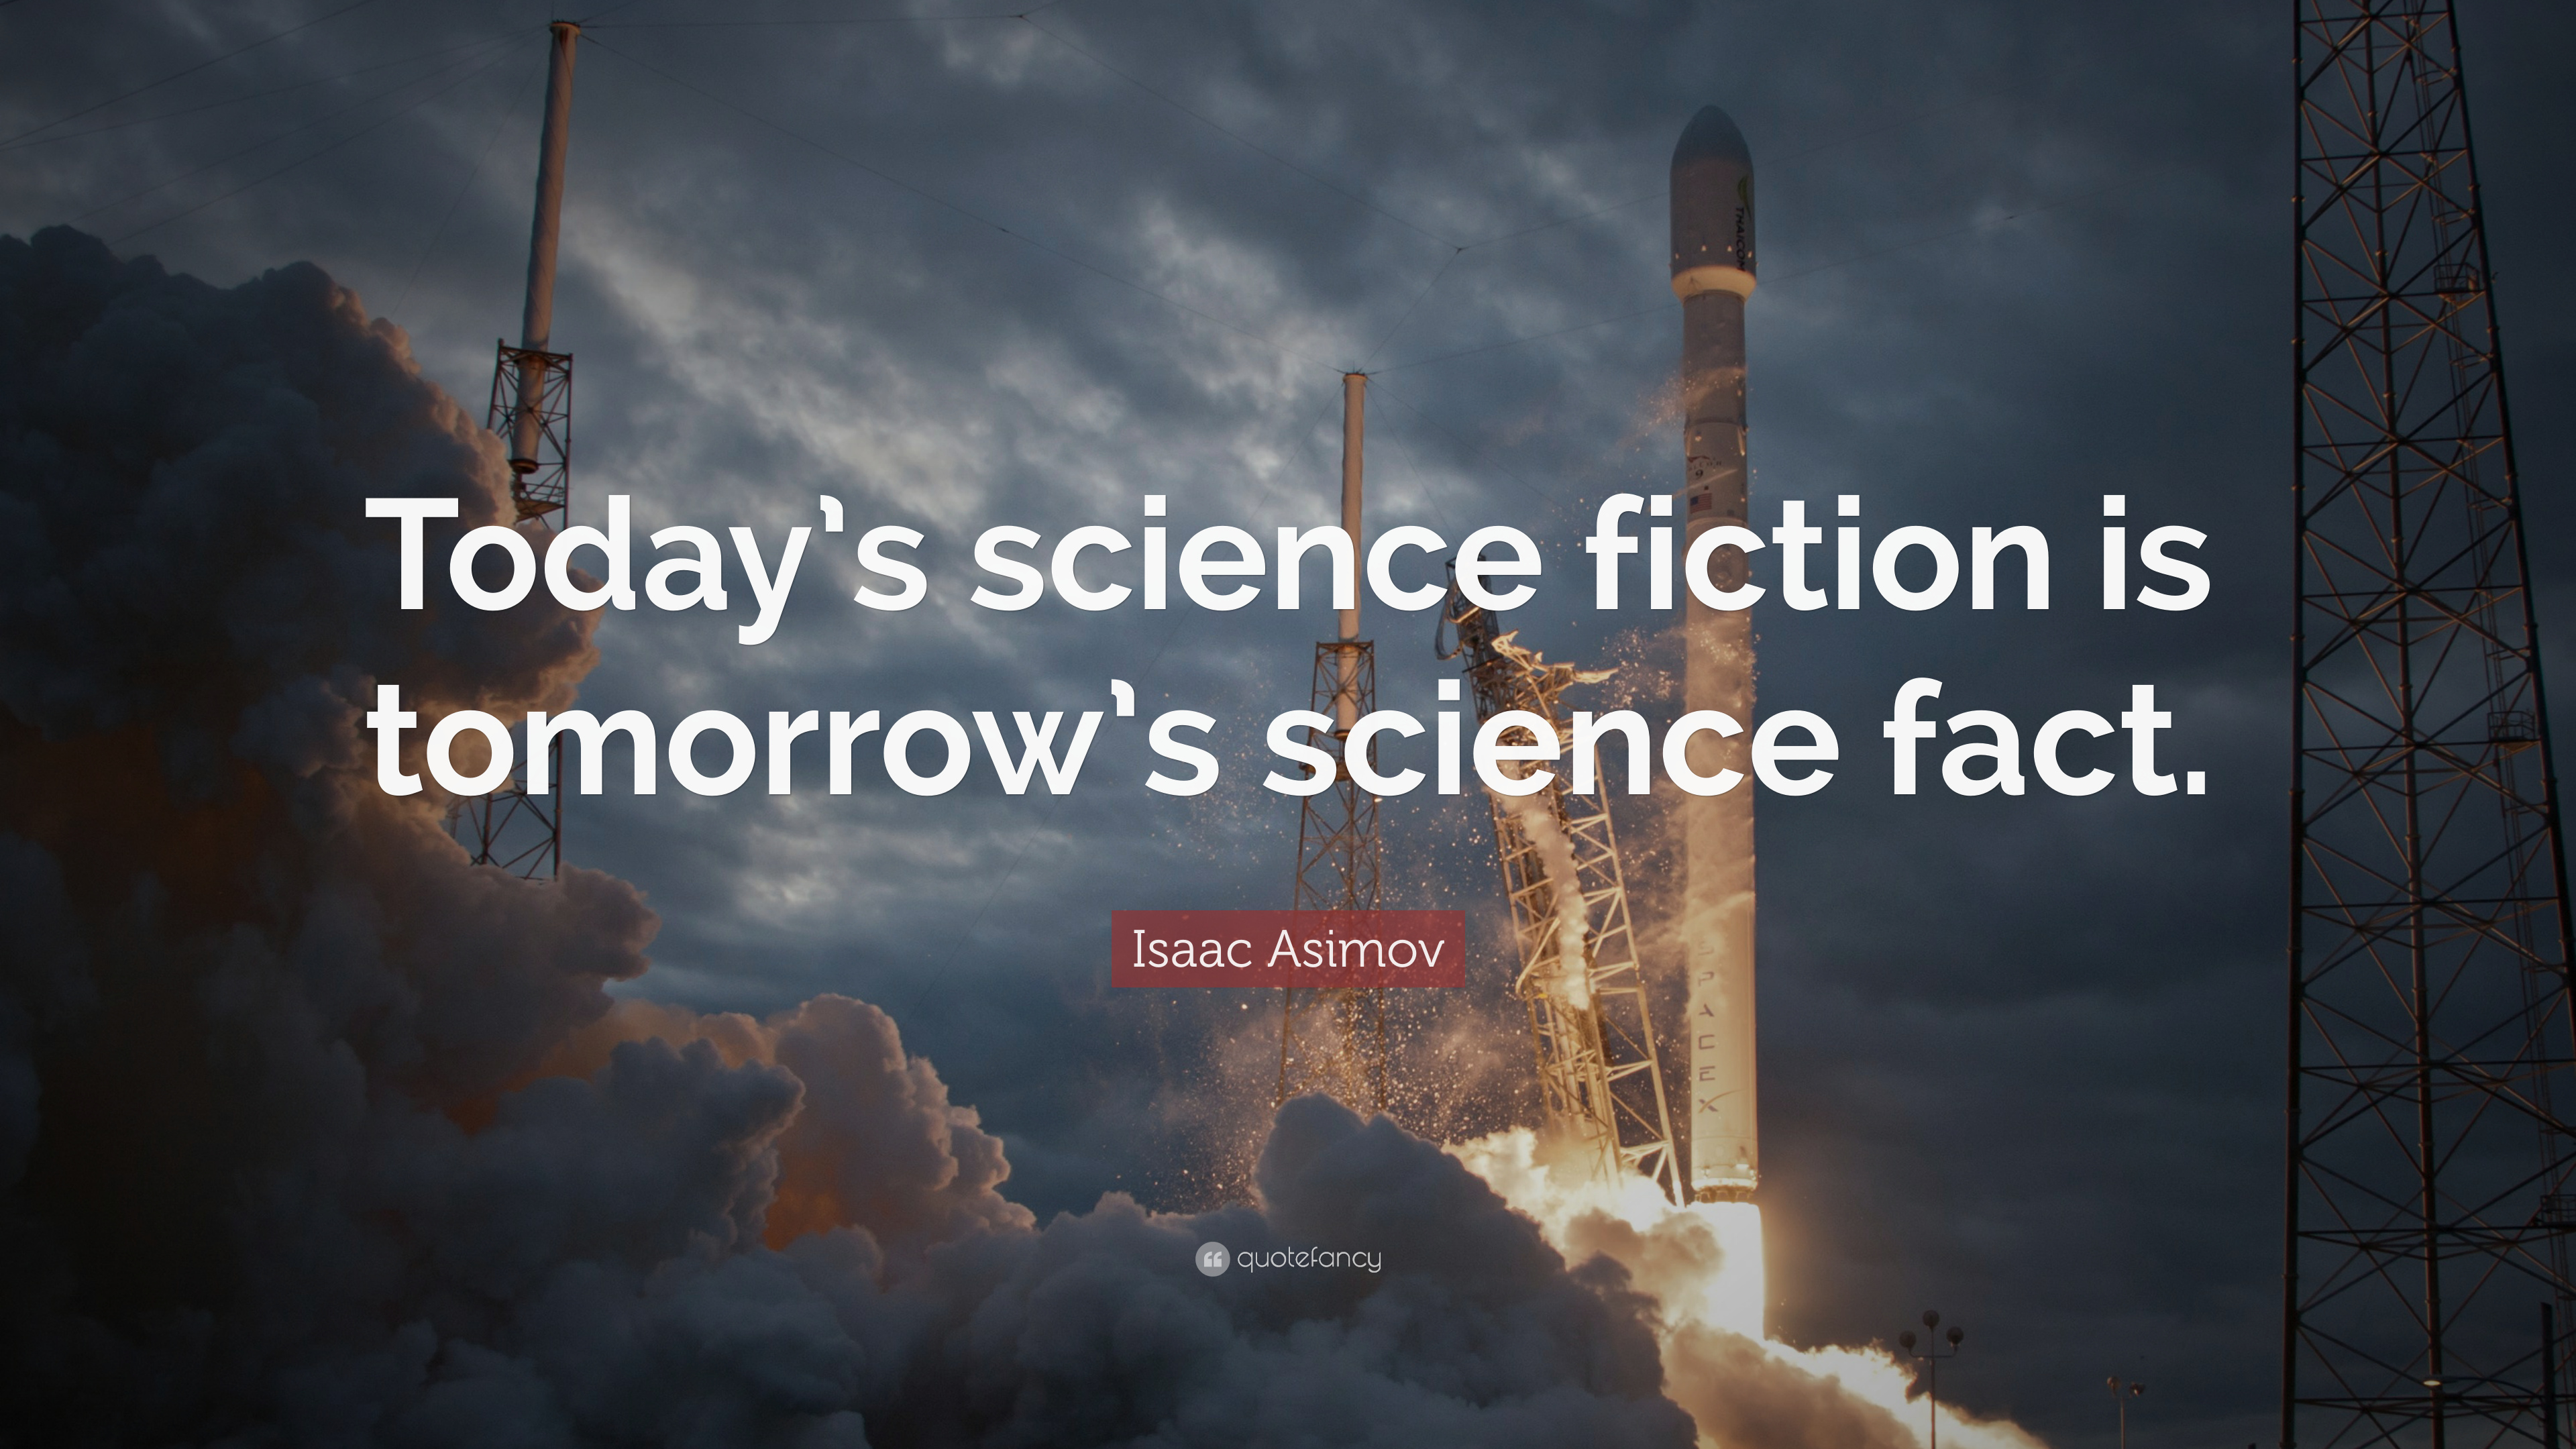 Isaac Asimov Quote: “Today's science fiction is tomorrow's science fact.” (13 wallpaper)